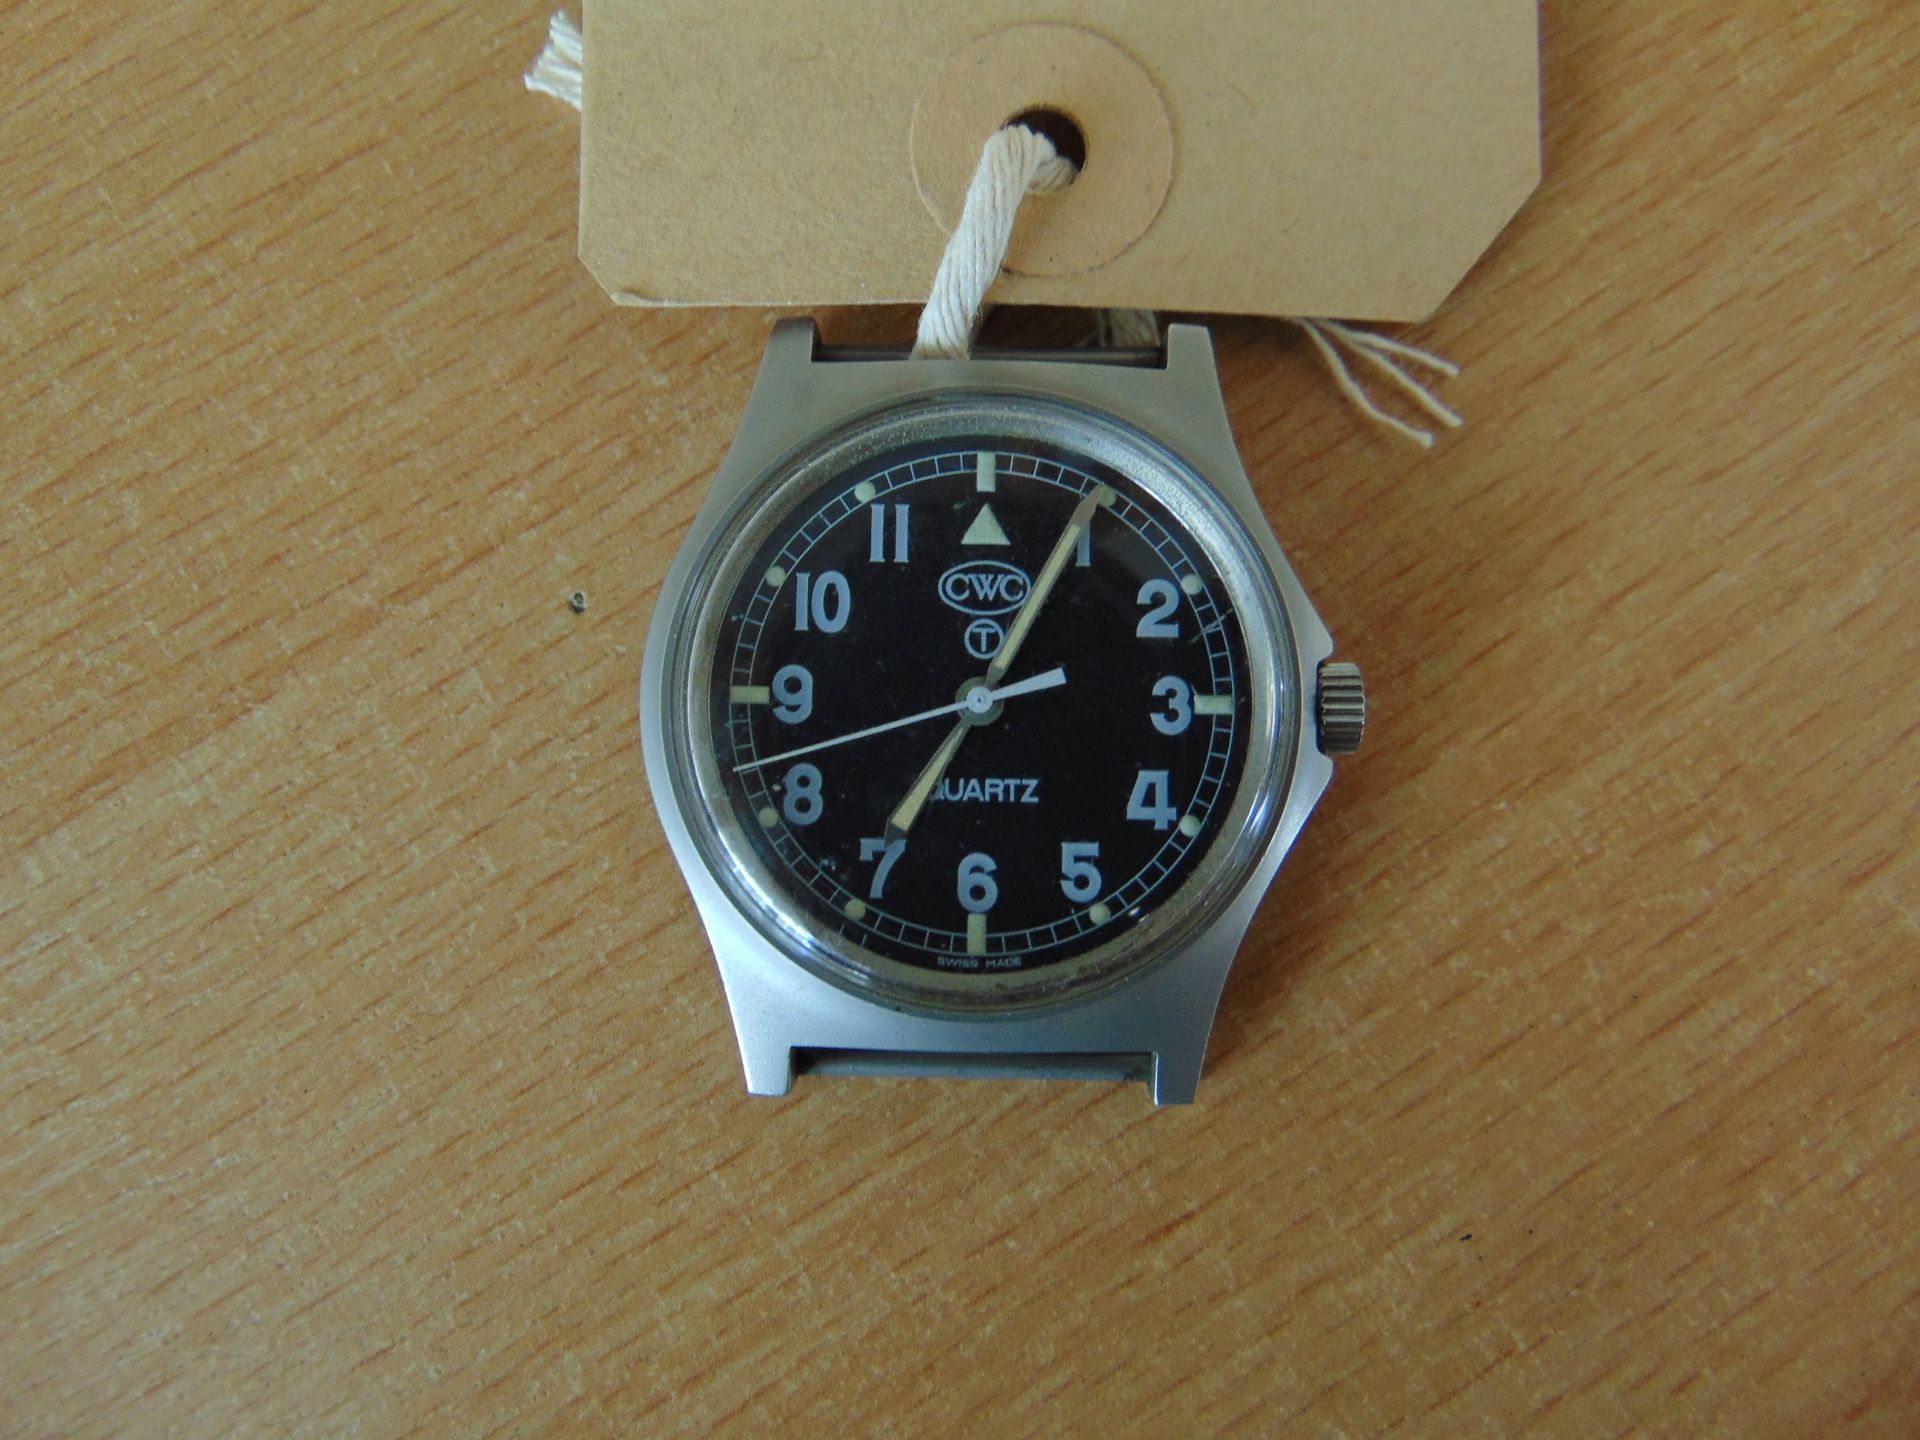 CWC 0552 Royal Marines / Navy Issue Service Watch, Nato Marks